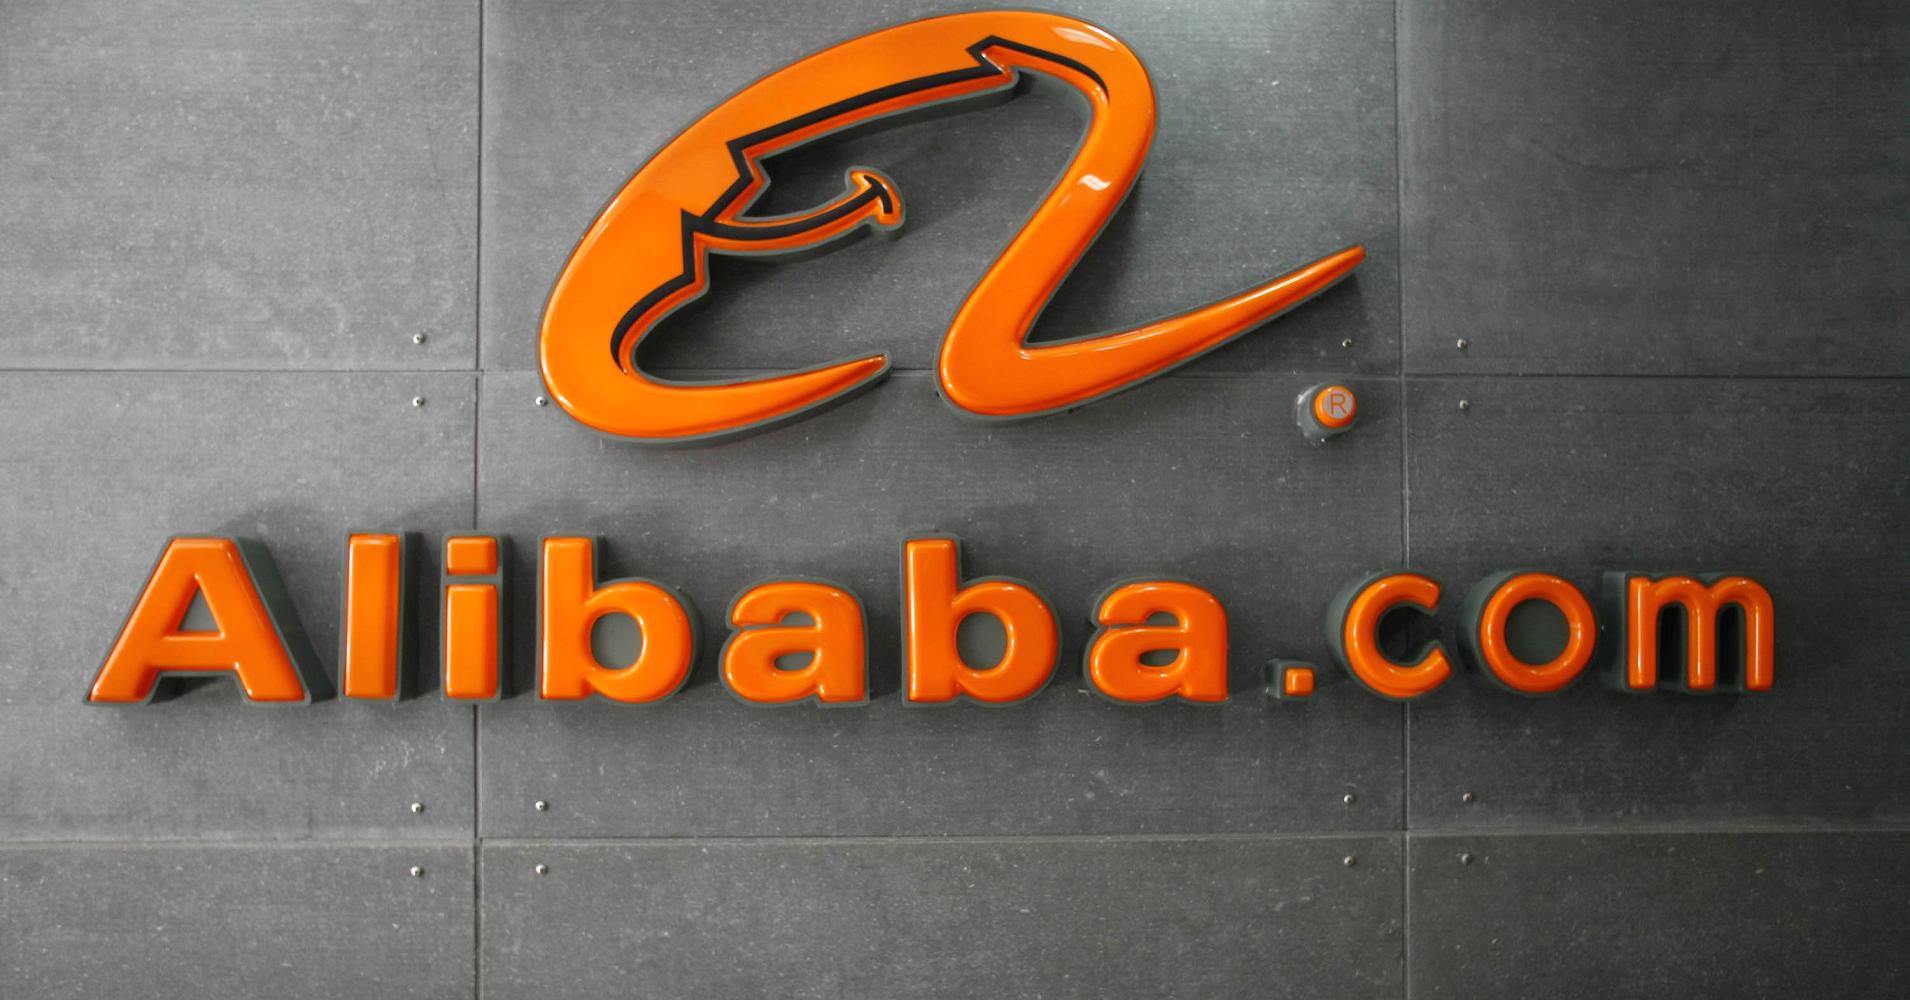 Alibaba Will not Make Cars, instead set to make Cars Software